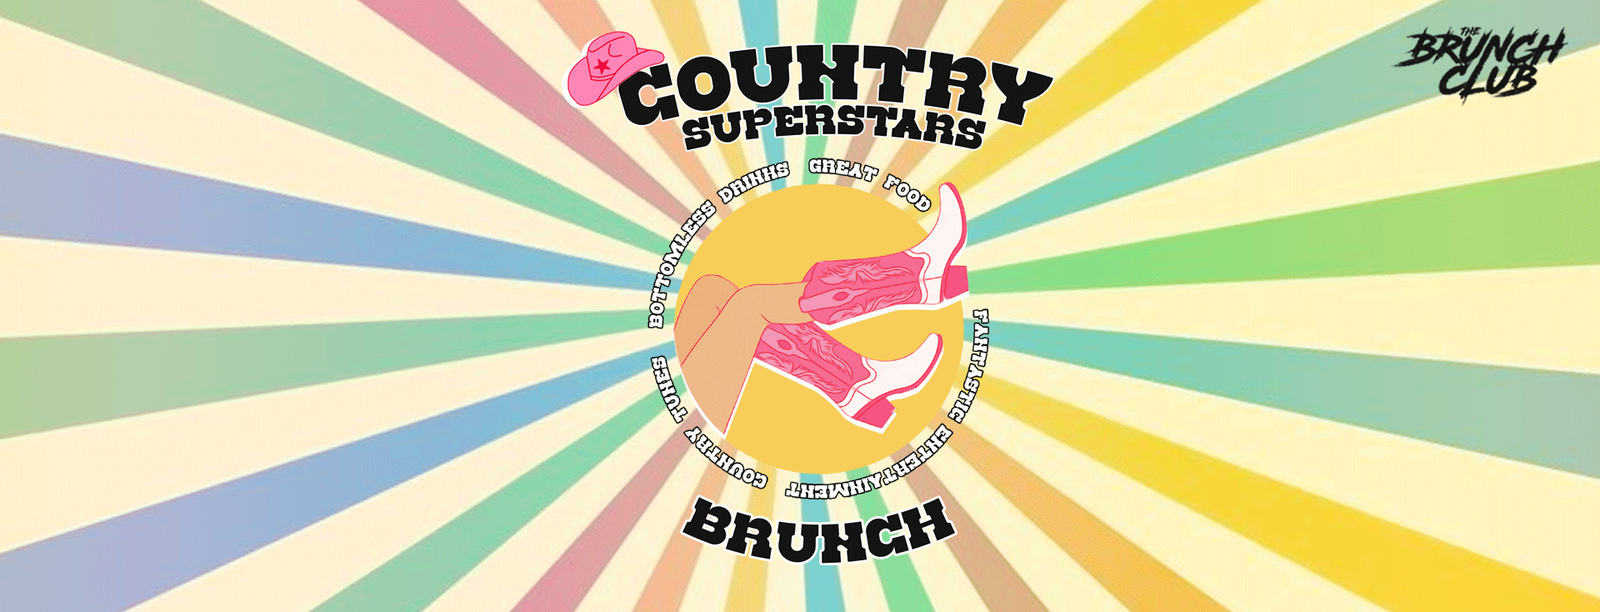 CANCELLED Country Superstars Bottomless Brunch - Norwich